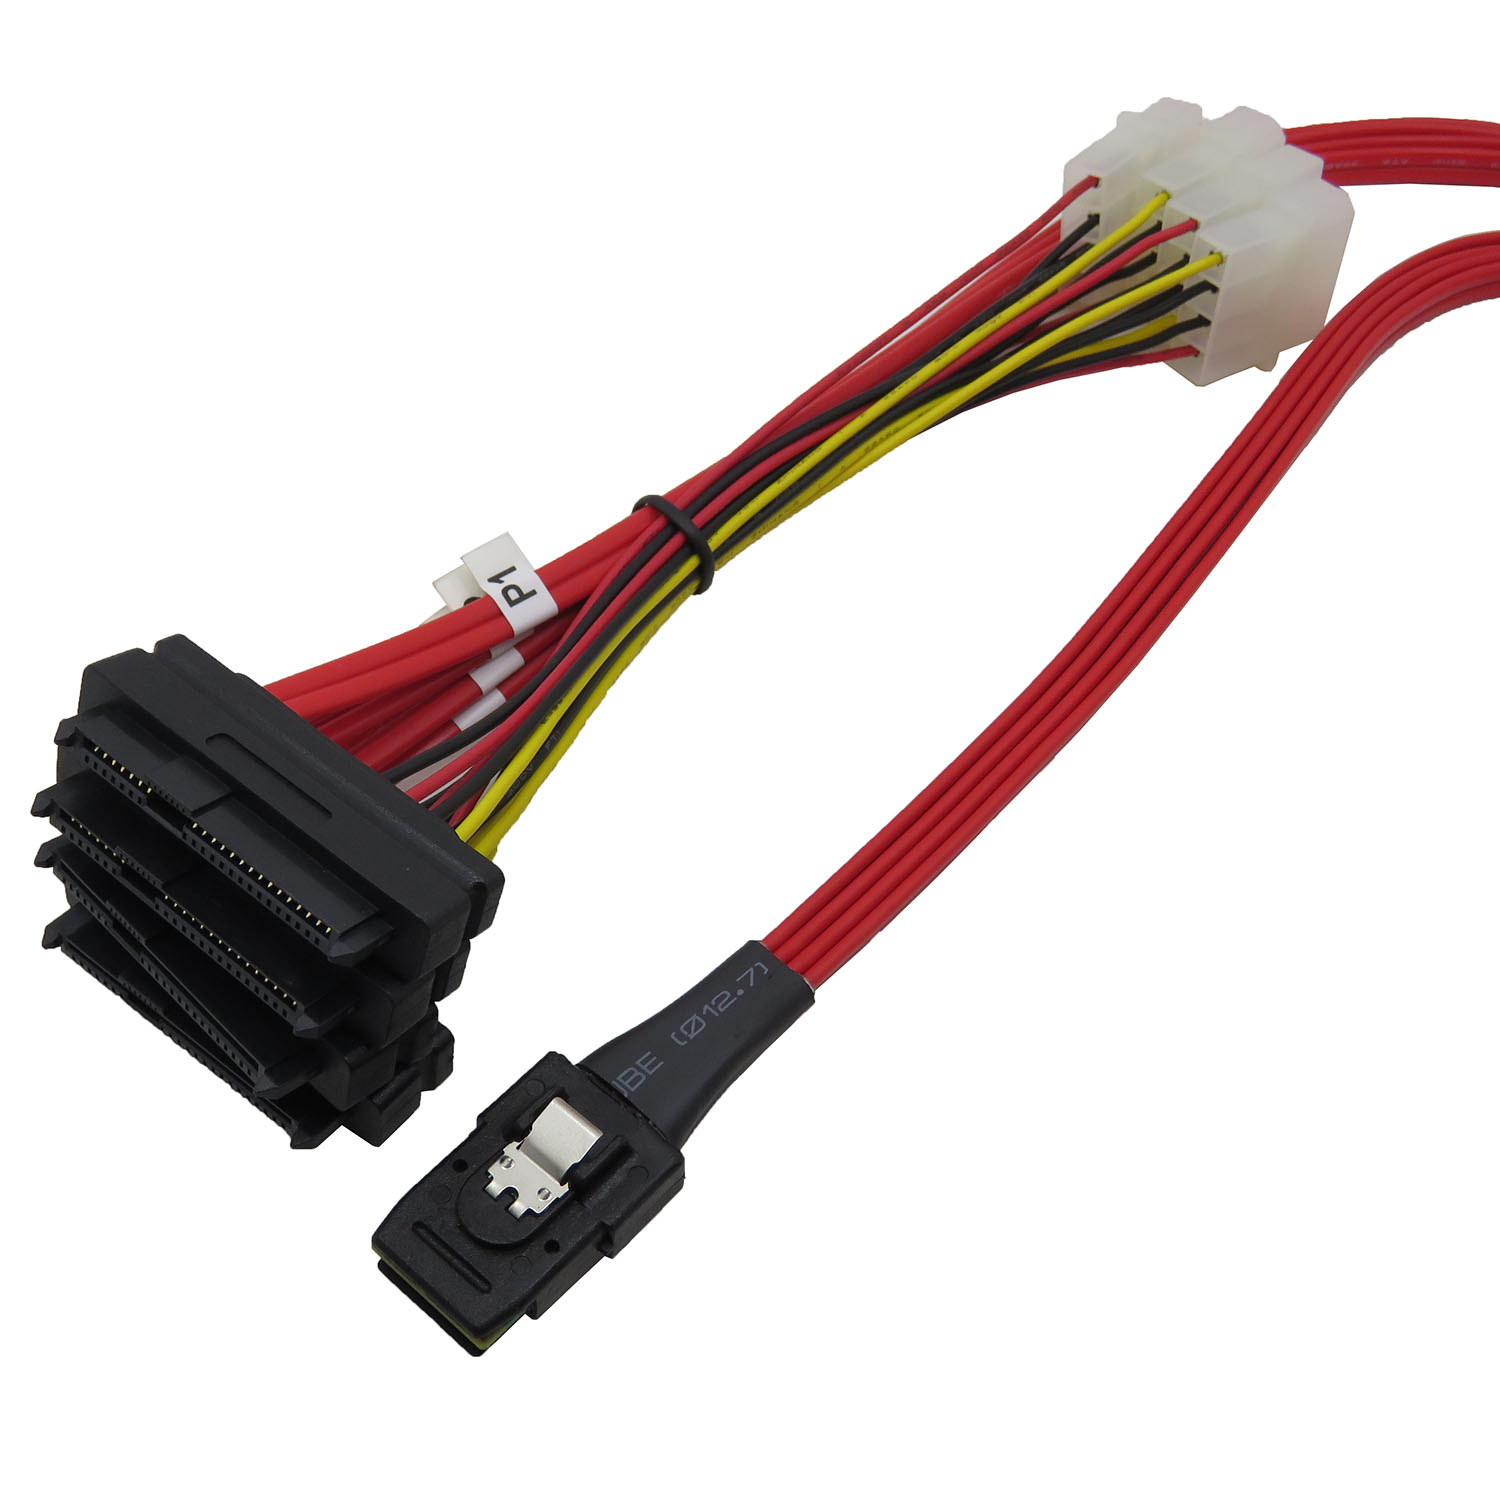 CABLEDECONN Mini SAS 36 SFF-8087 to (4) SFF-8482 Connectors with 4P Power Cable 1M H0408